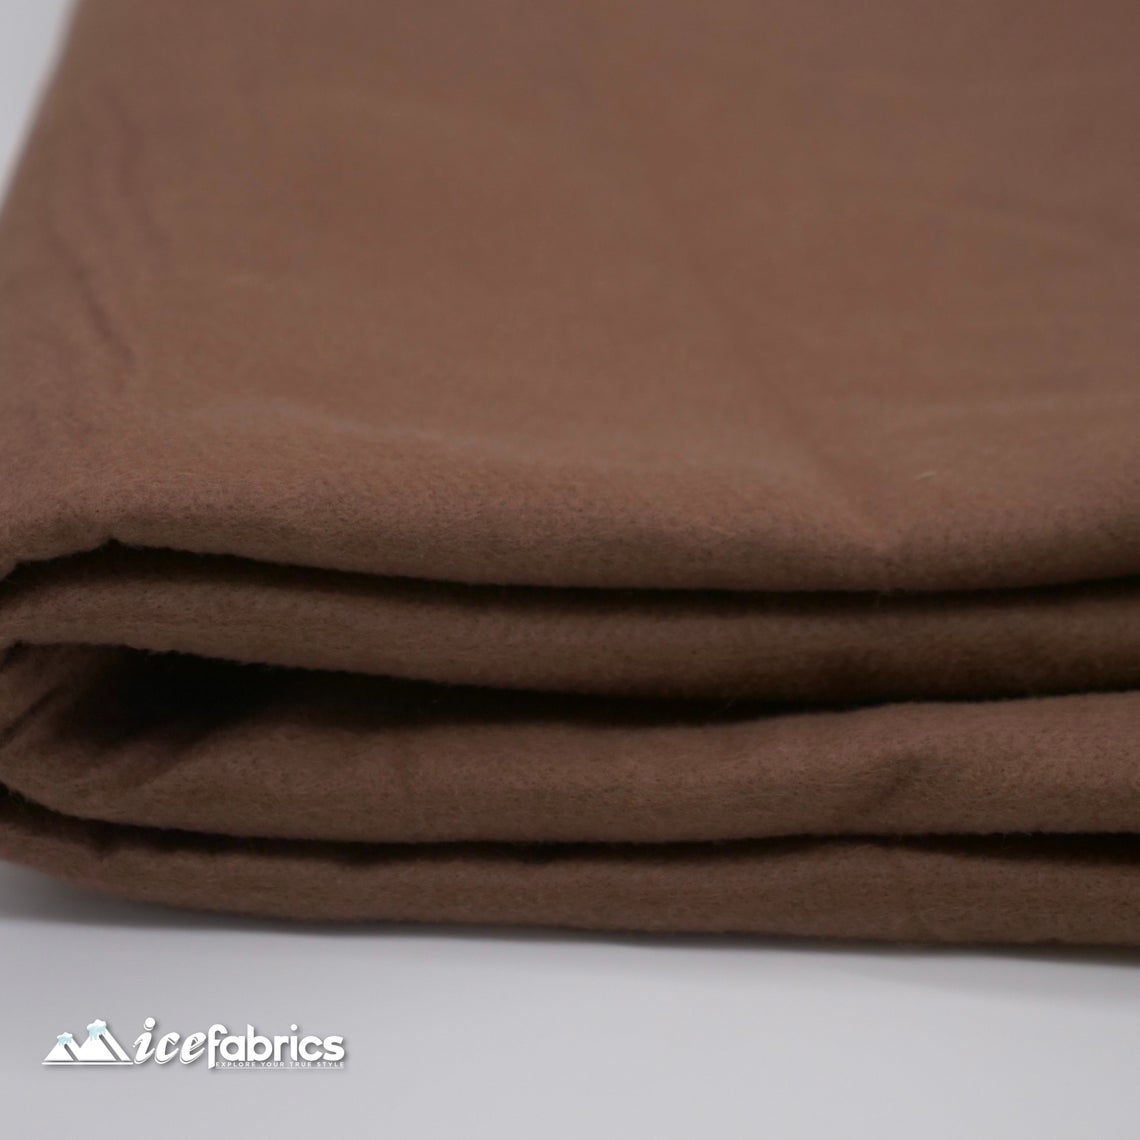 72" Wide 1.6 mm Thick Acrylic Brown Felt Fabric By The YardICE FABRICSICE FABRICSPer Yard1.6mm Thick72" Wide 1.6 mm Thick Acrylic Brown Felt Fabric By The Yard ICE FABRICS